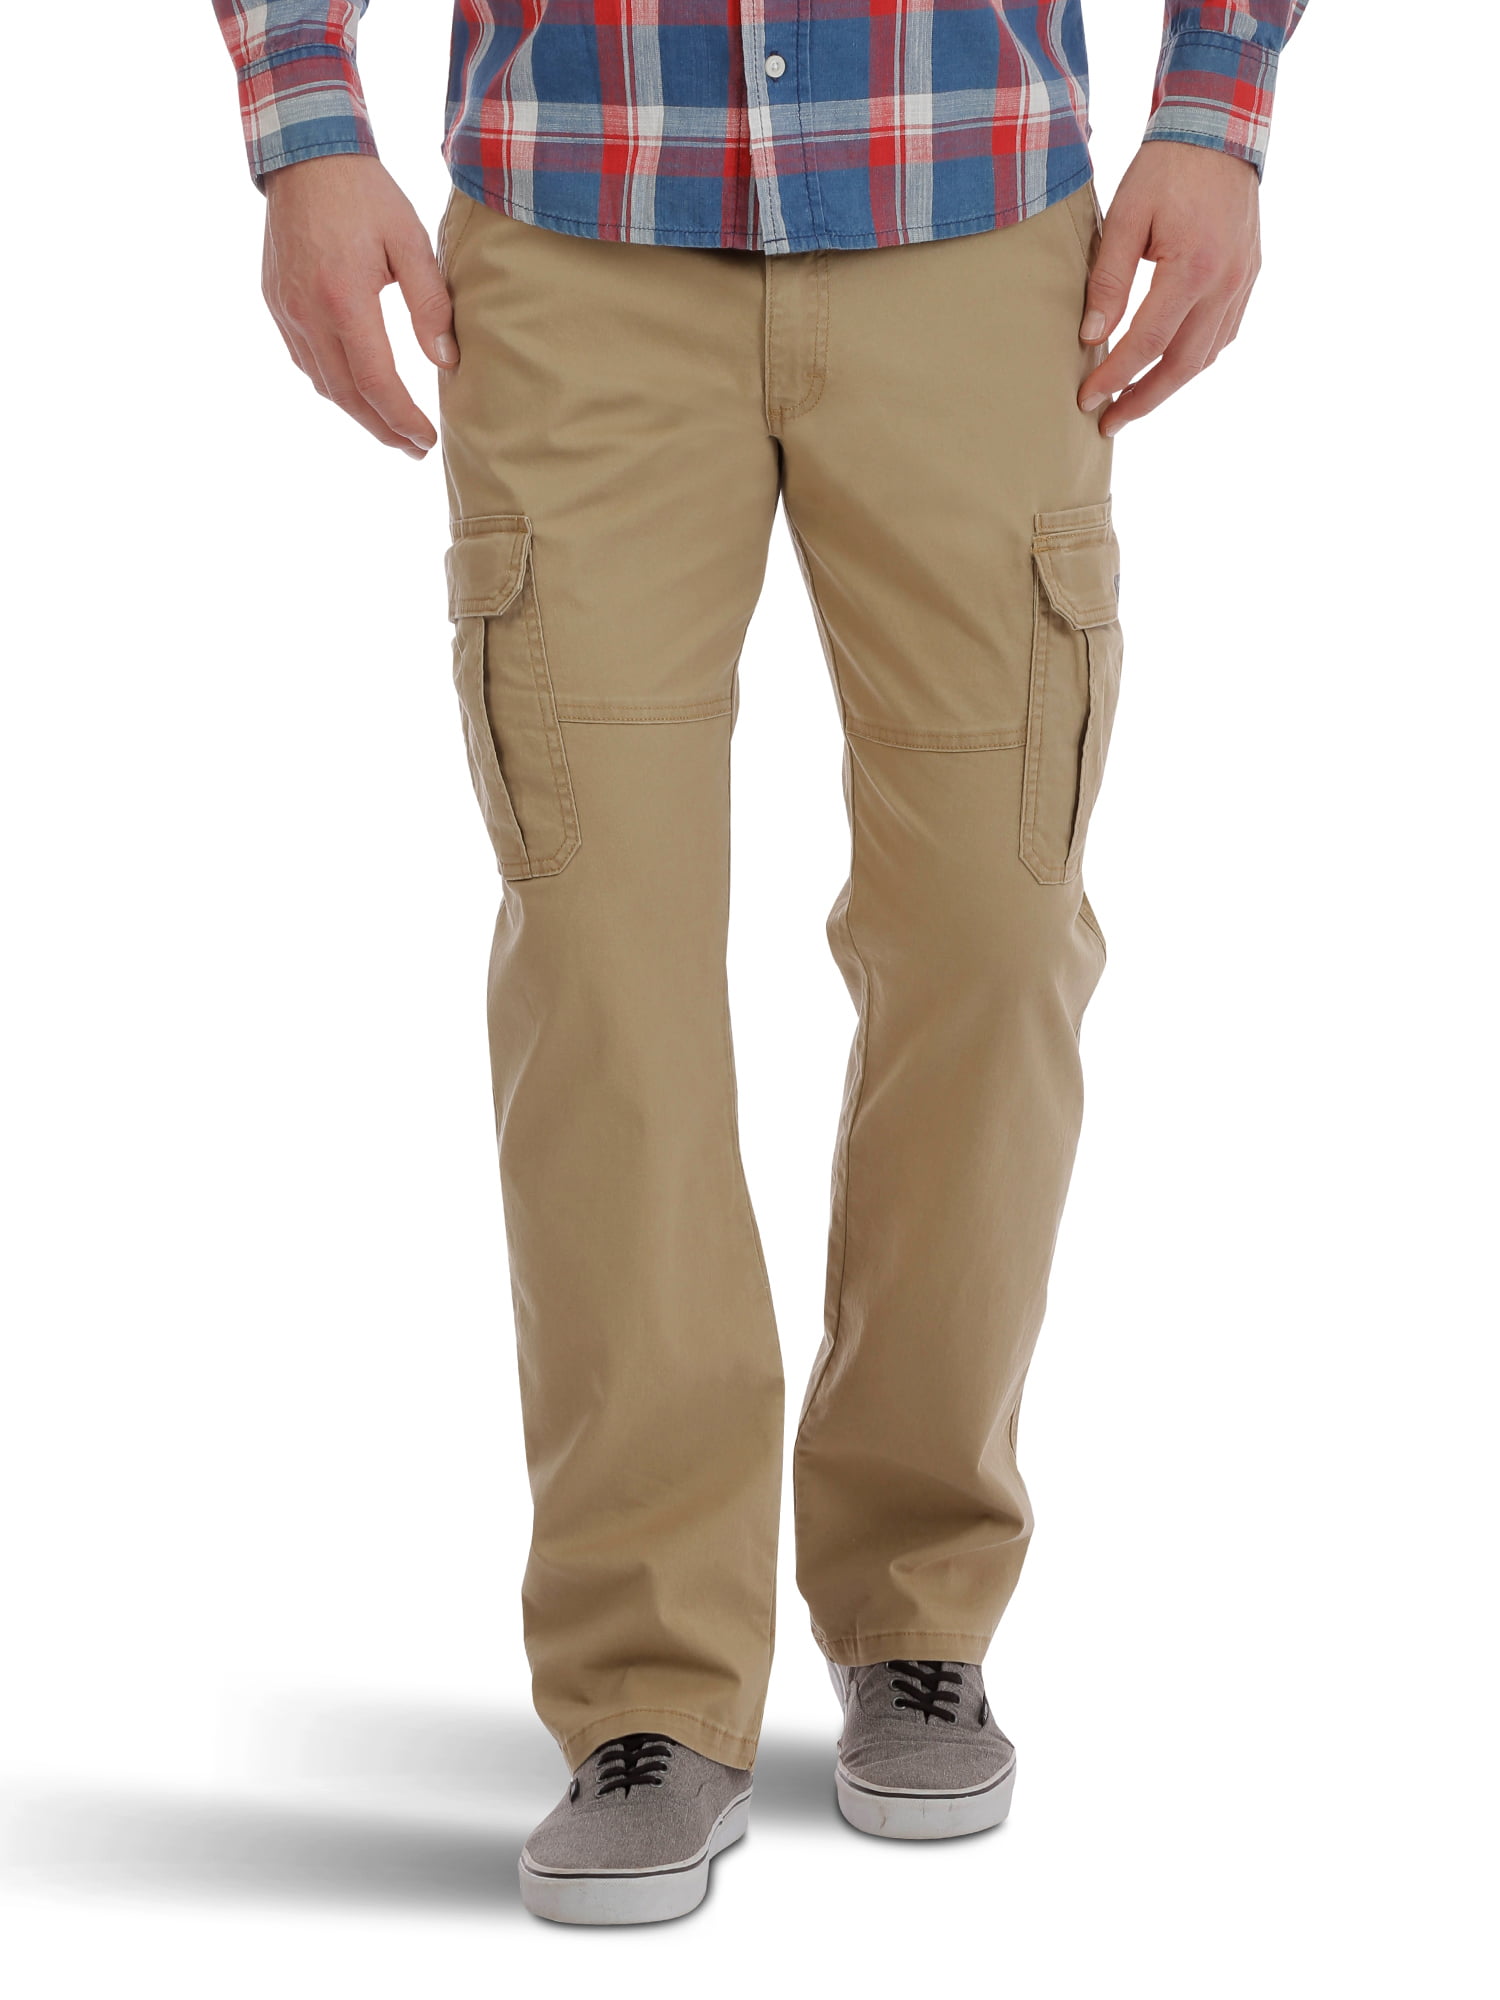 Wrangler - Men's Relaxed Fit Cargo Pant with Stretch - Walmart.com